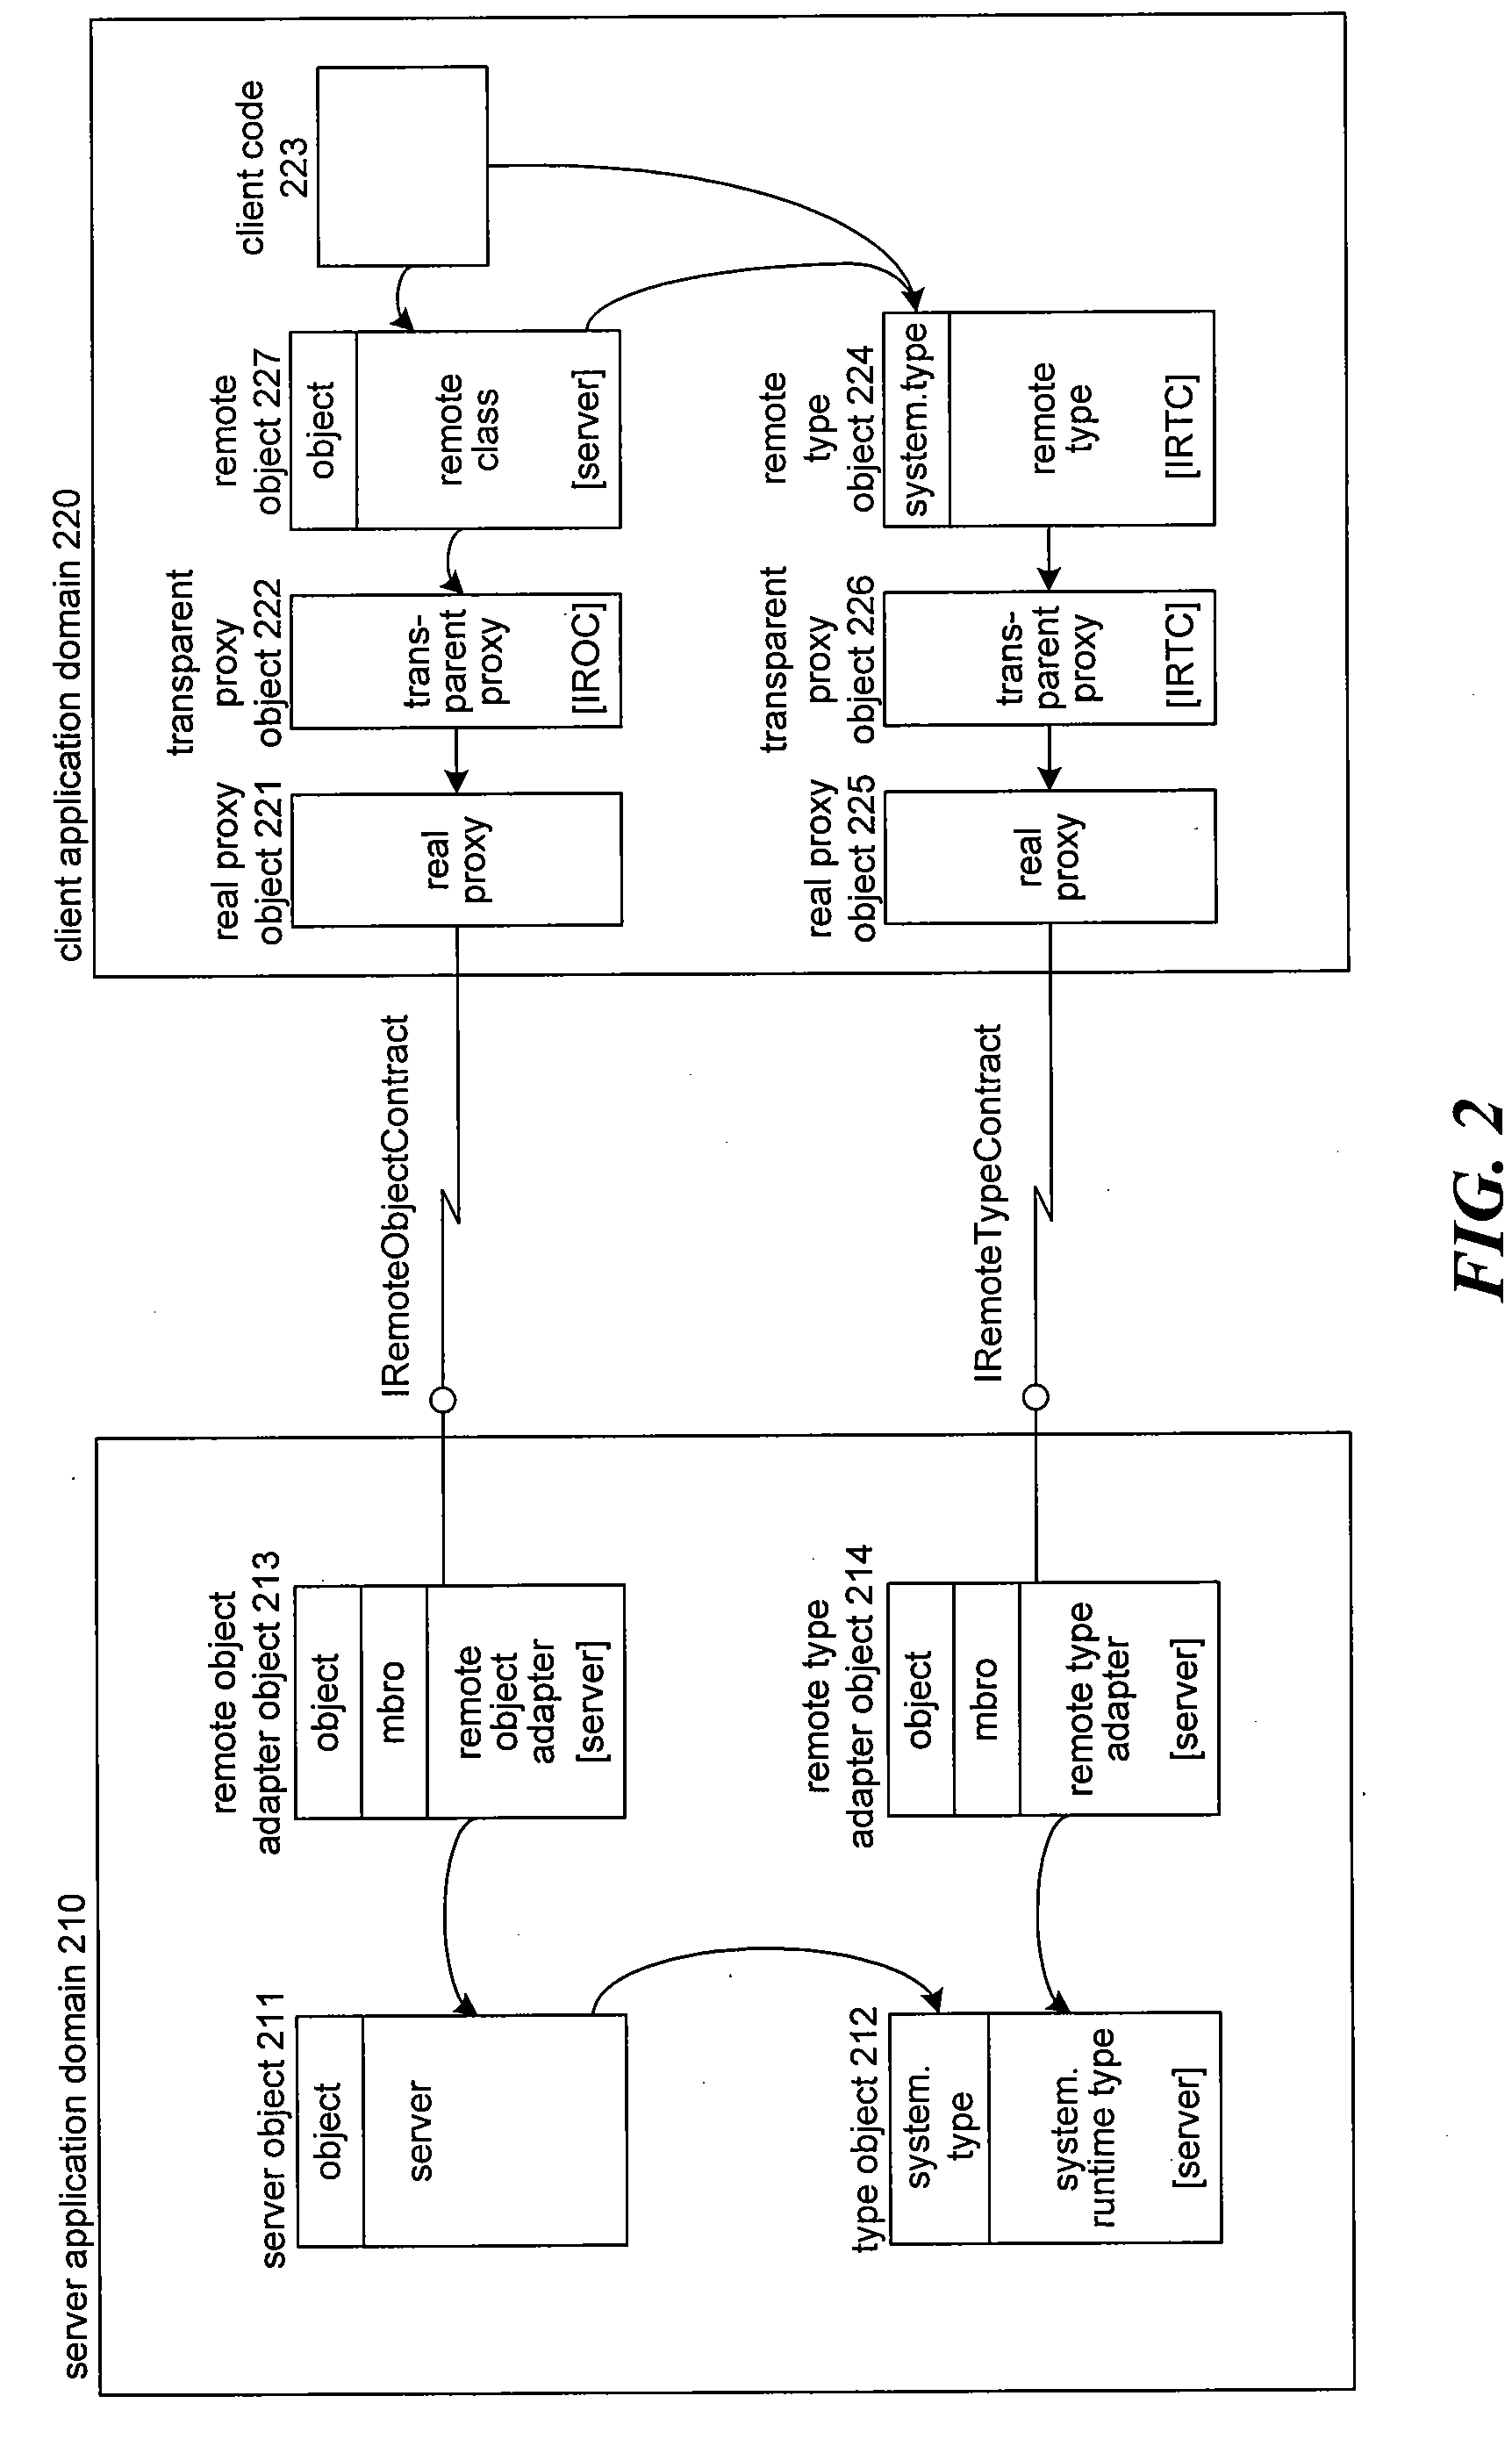 Cross application domain late binding to non-local types